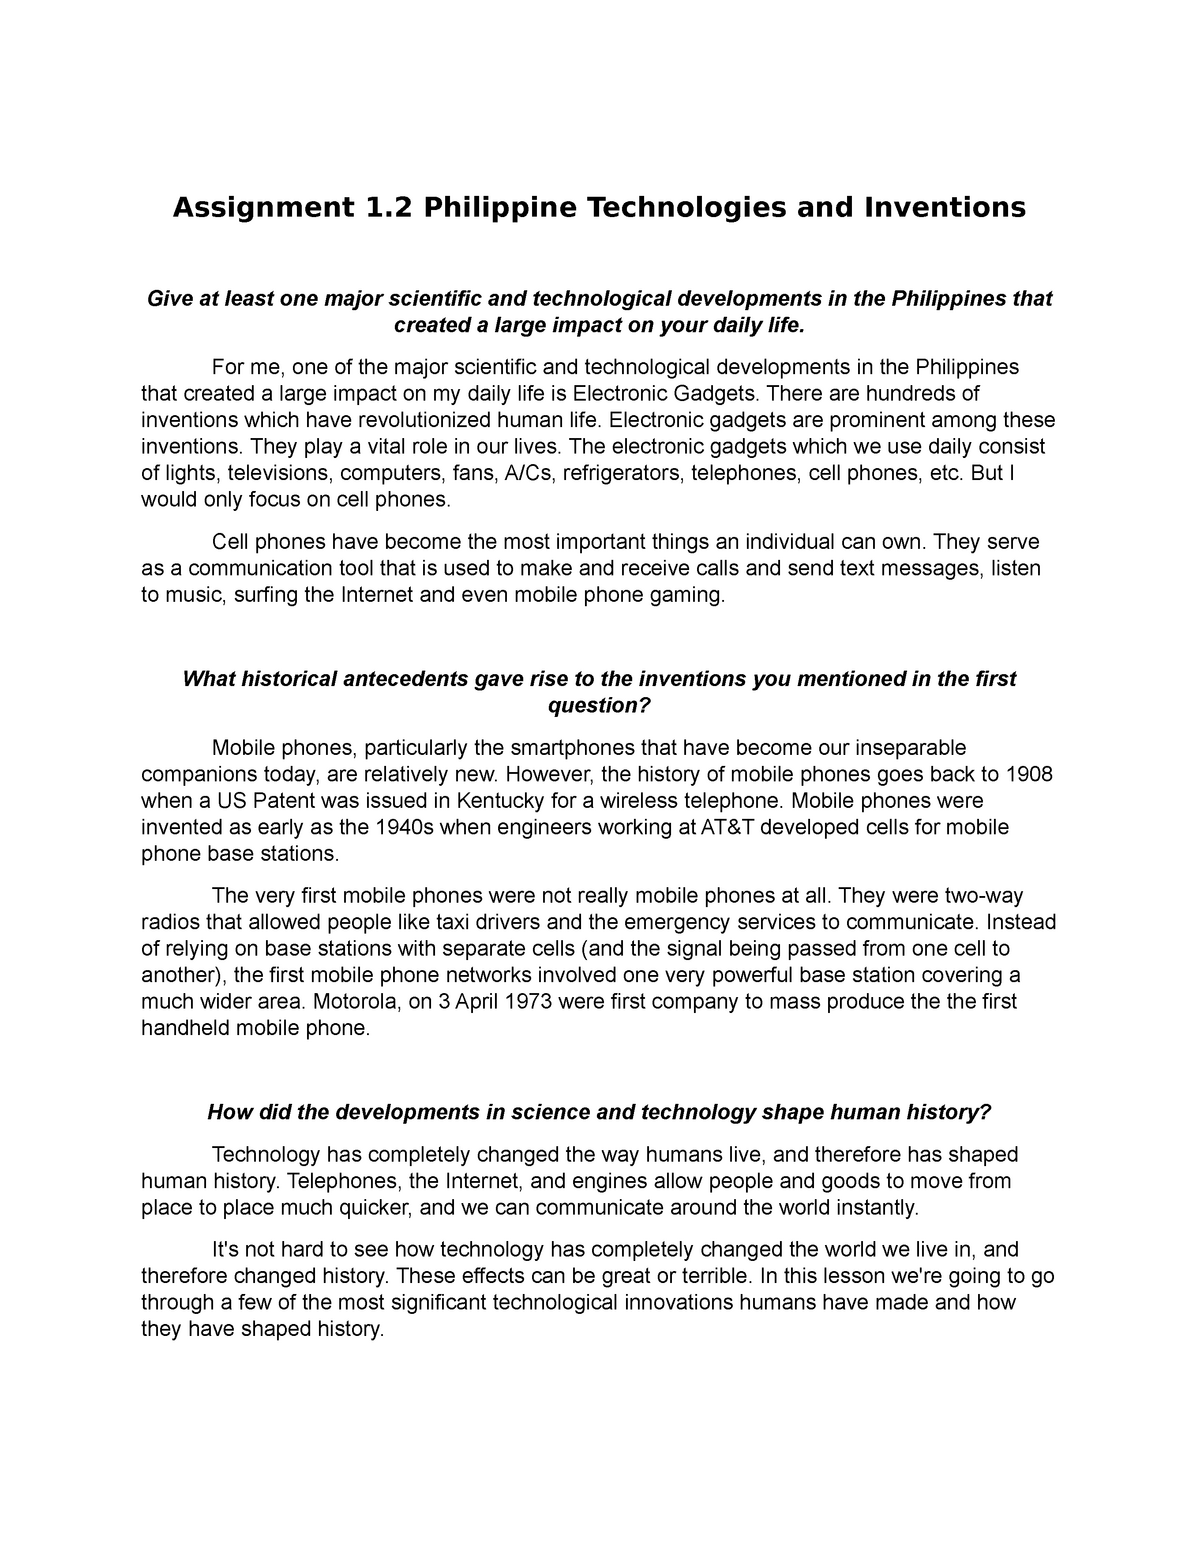 quantitative research about technology in the philippines